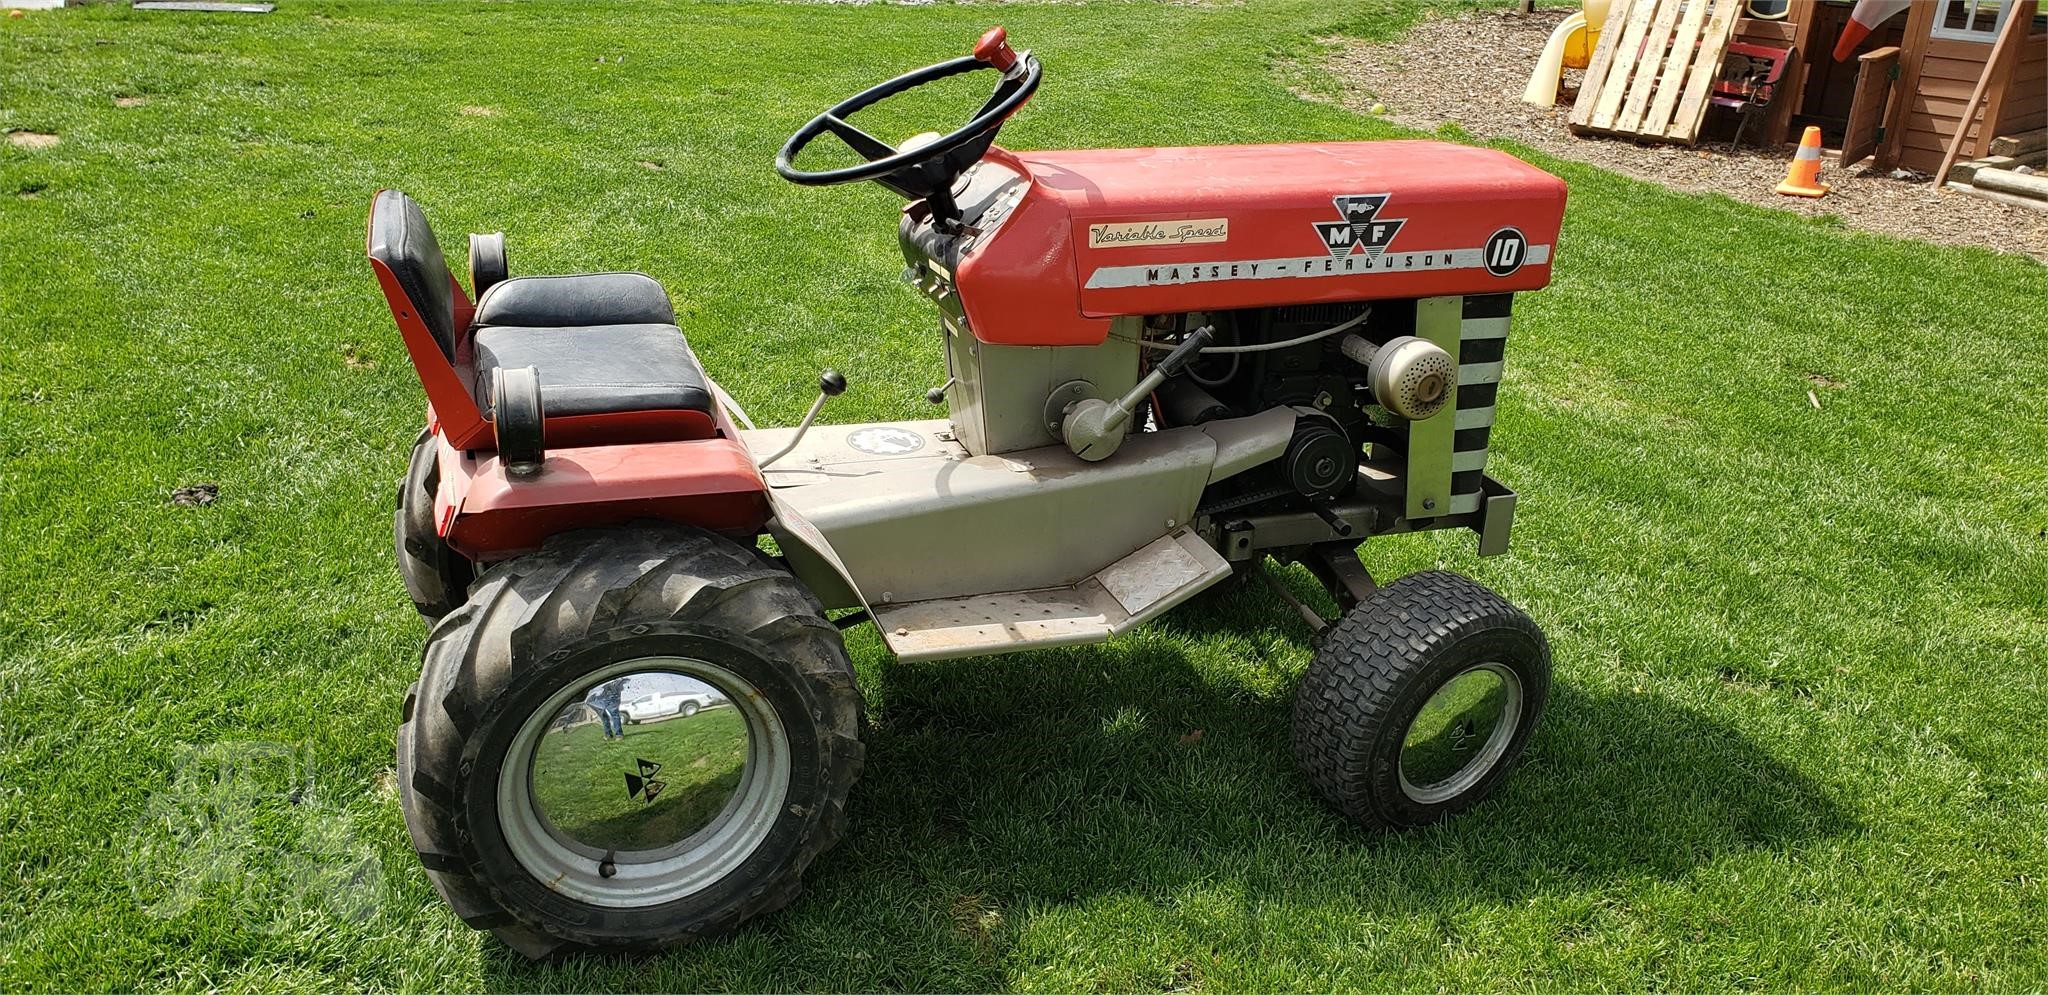 Massey Ferguson Riding Lawn Mowers Auction Results 50 Listings Tractorhouse Com Page 1 Of 2